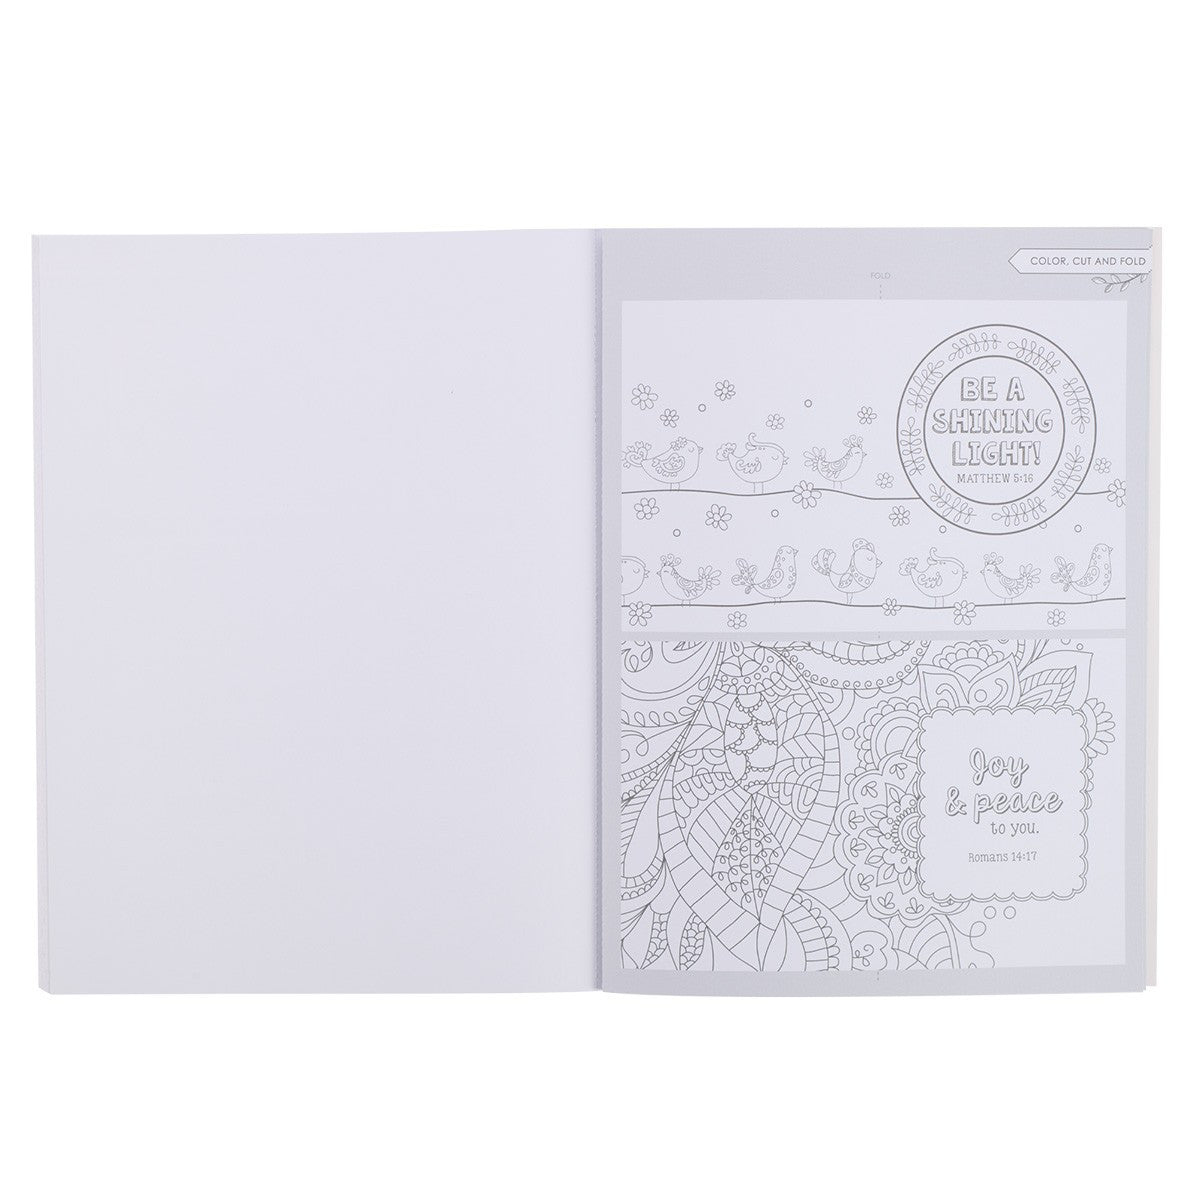 Surprised by Joy Coloring Book | 2FruitBearers